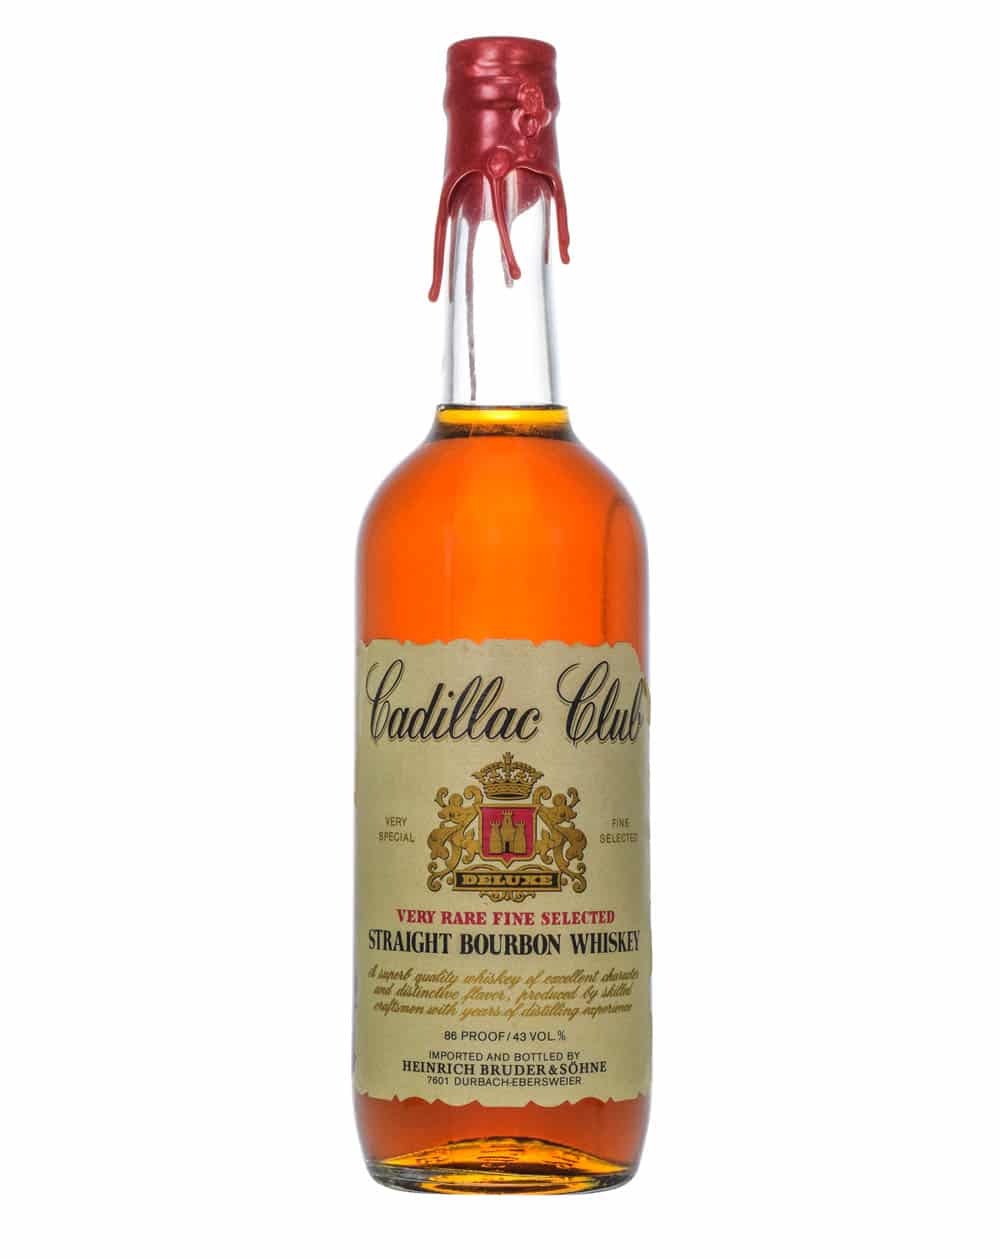 Cadillac Club Deluxe Straight Bourbon Whiskey 1970s Must Have Malts MHM